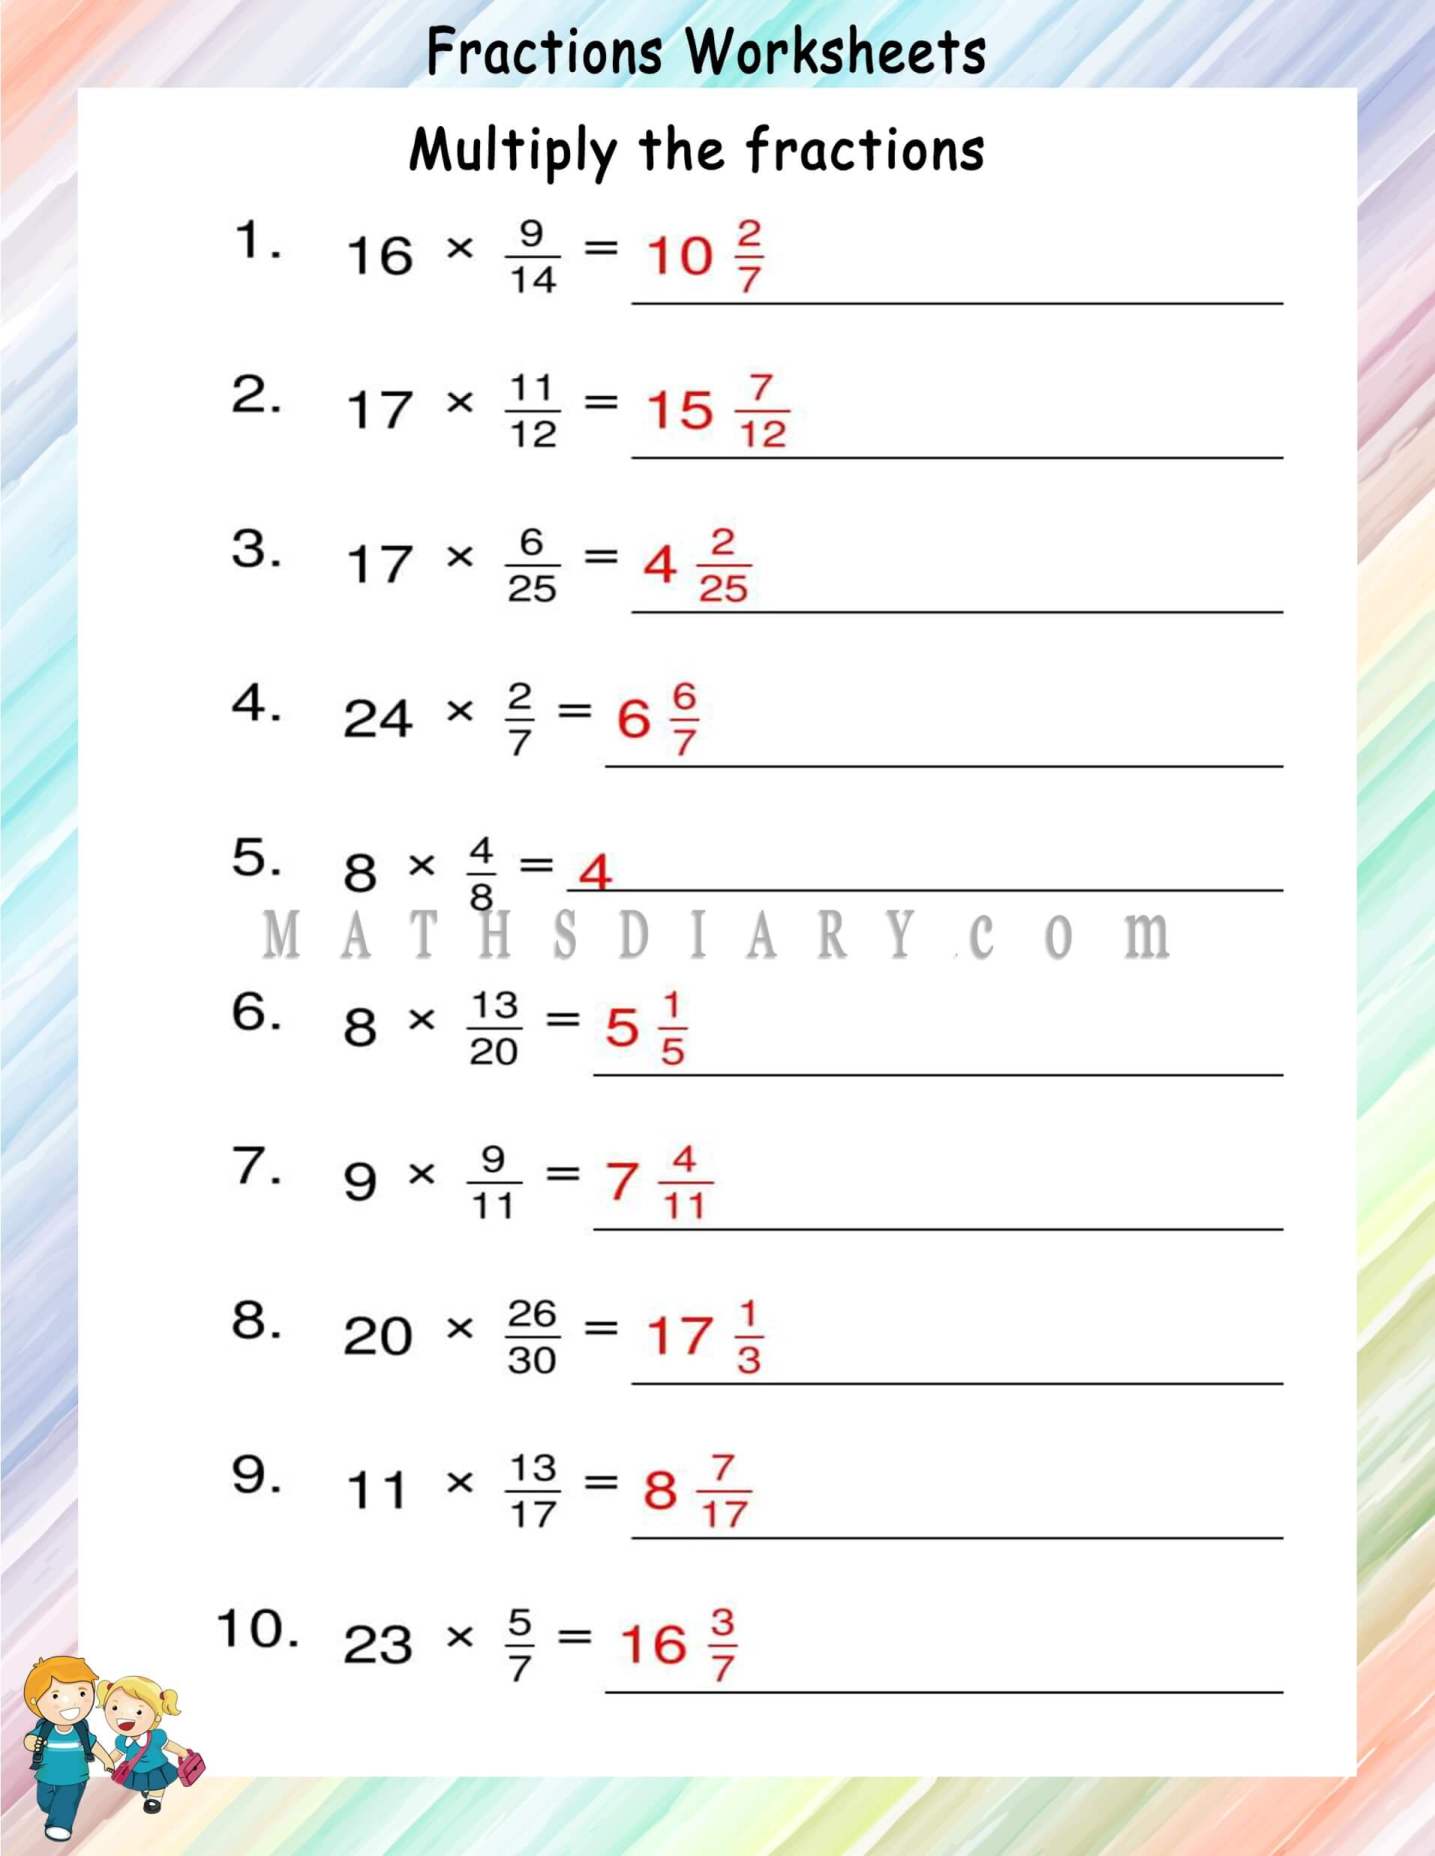 multiply-fractions-by-whole-numbers-worksheet-for-3rd-4th-grade-lesson-planet